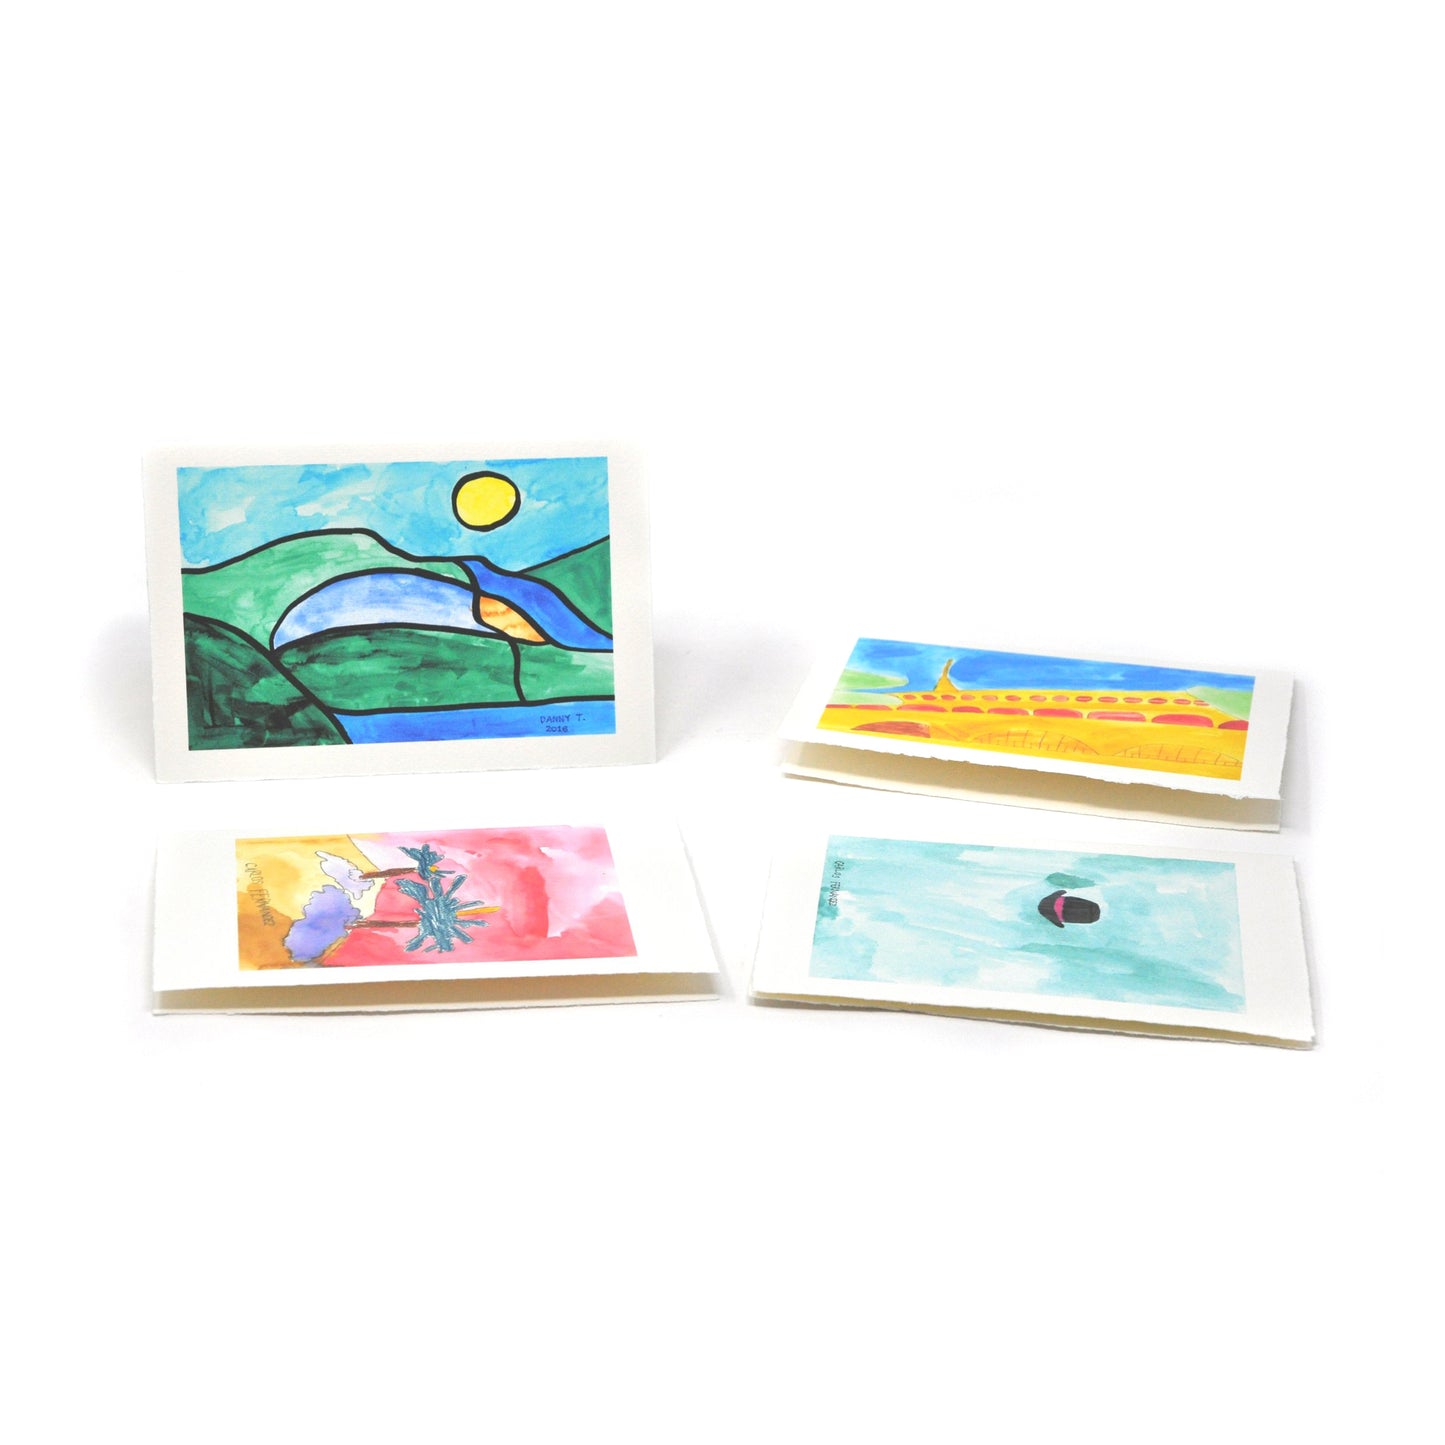 NIAD Greeting Cards (Four-Pack)